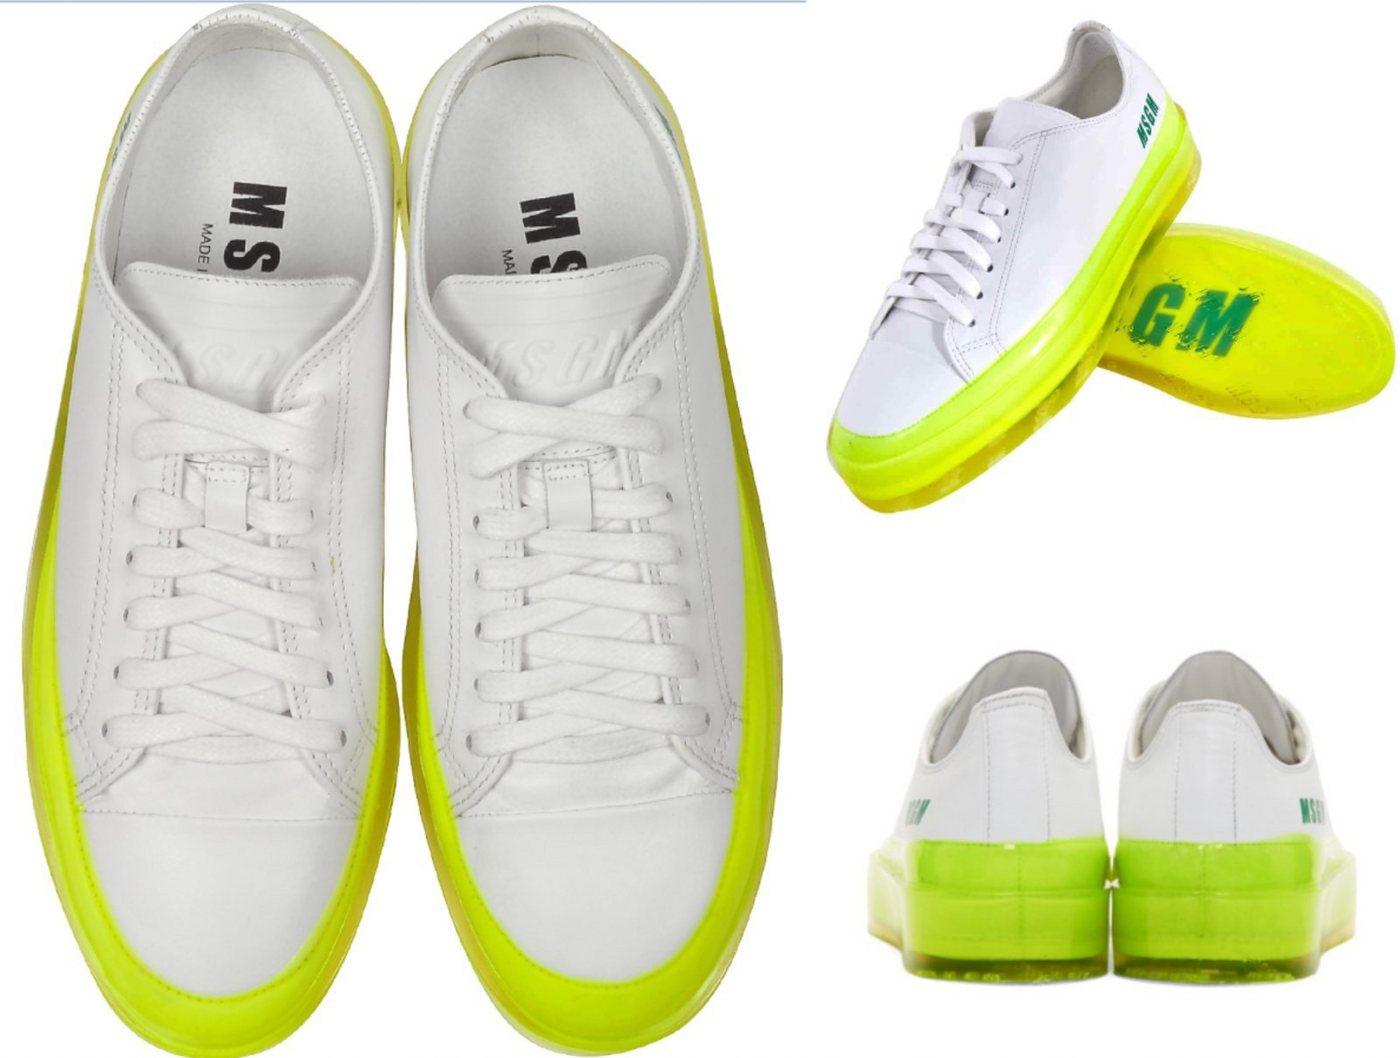 MSGM MSGM RBRSL Rubber Soul Edition Fluo Floating Sneakers Turnschuhe Shoes Sneaker von MSGM